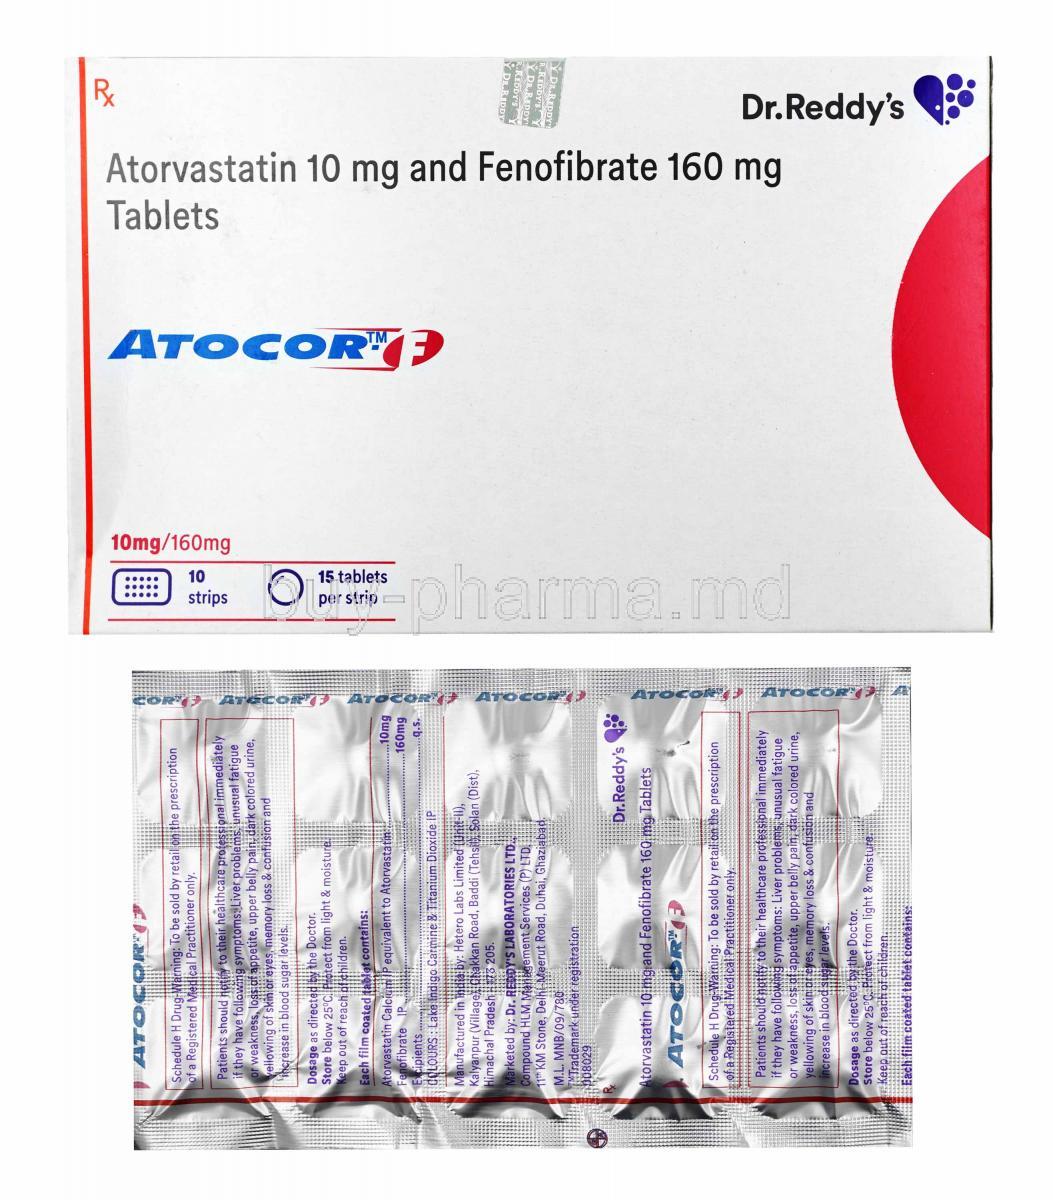 Atocor-F, Atorvastatin and Fenofibrate box and tablets